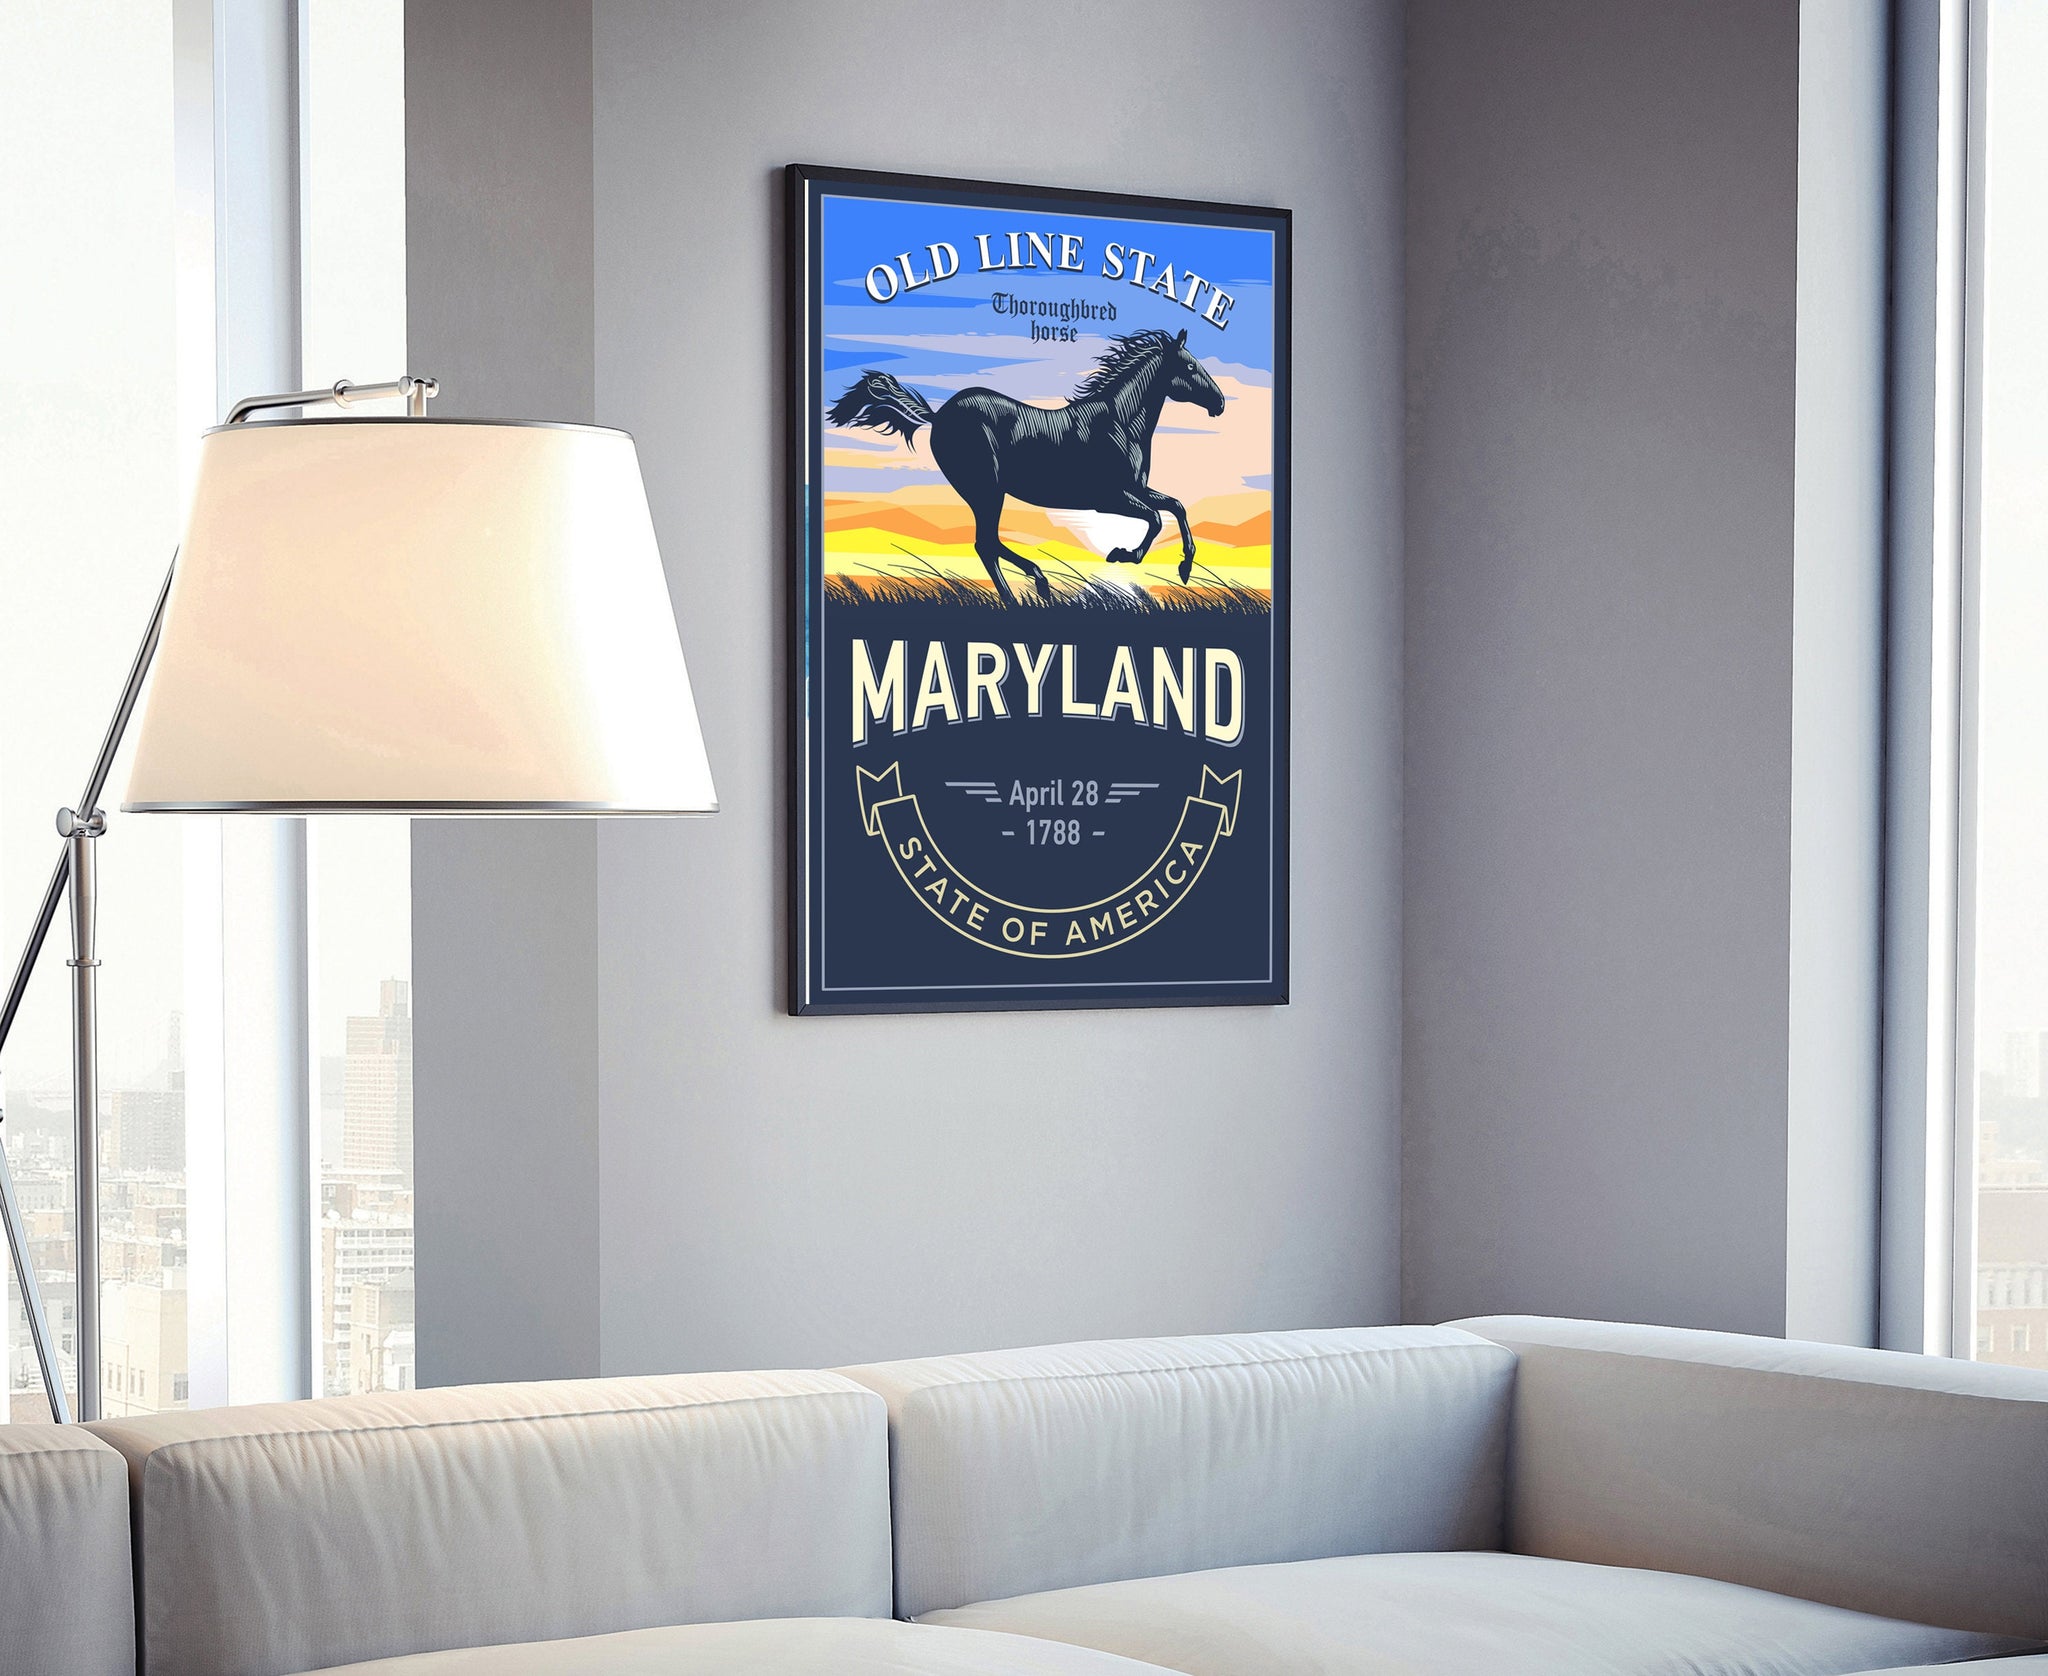 United States Poster, Maryland State Poster Print, Maryland State Emblem Poster, Retro Travel State Poster, Home Wall Art, Office Wall Art